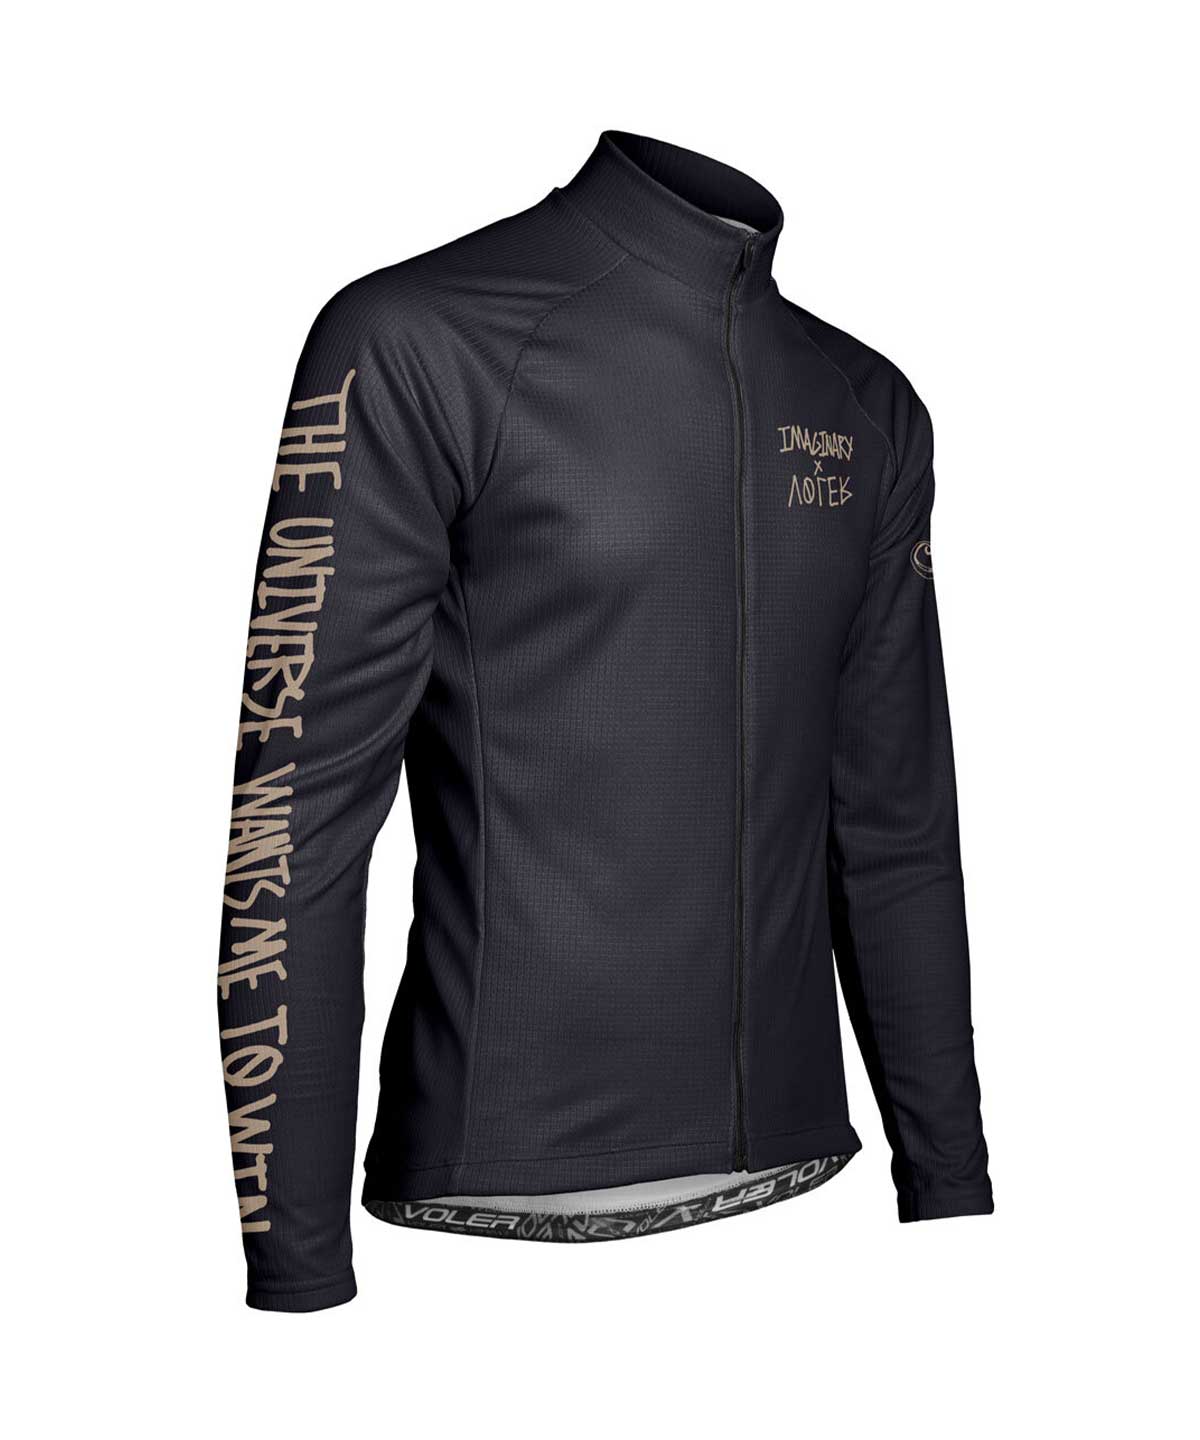 M. PELOTON THERMAL JERSEY - IMAGINARY COLLECTIVE